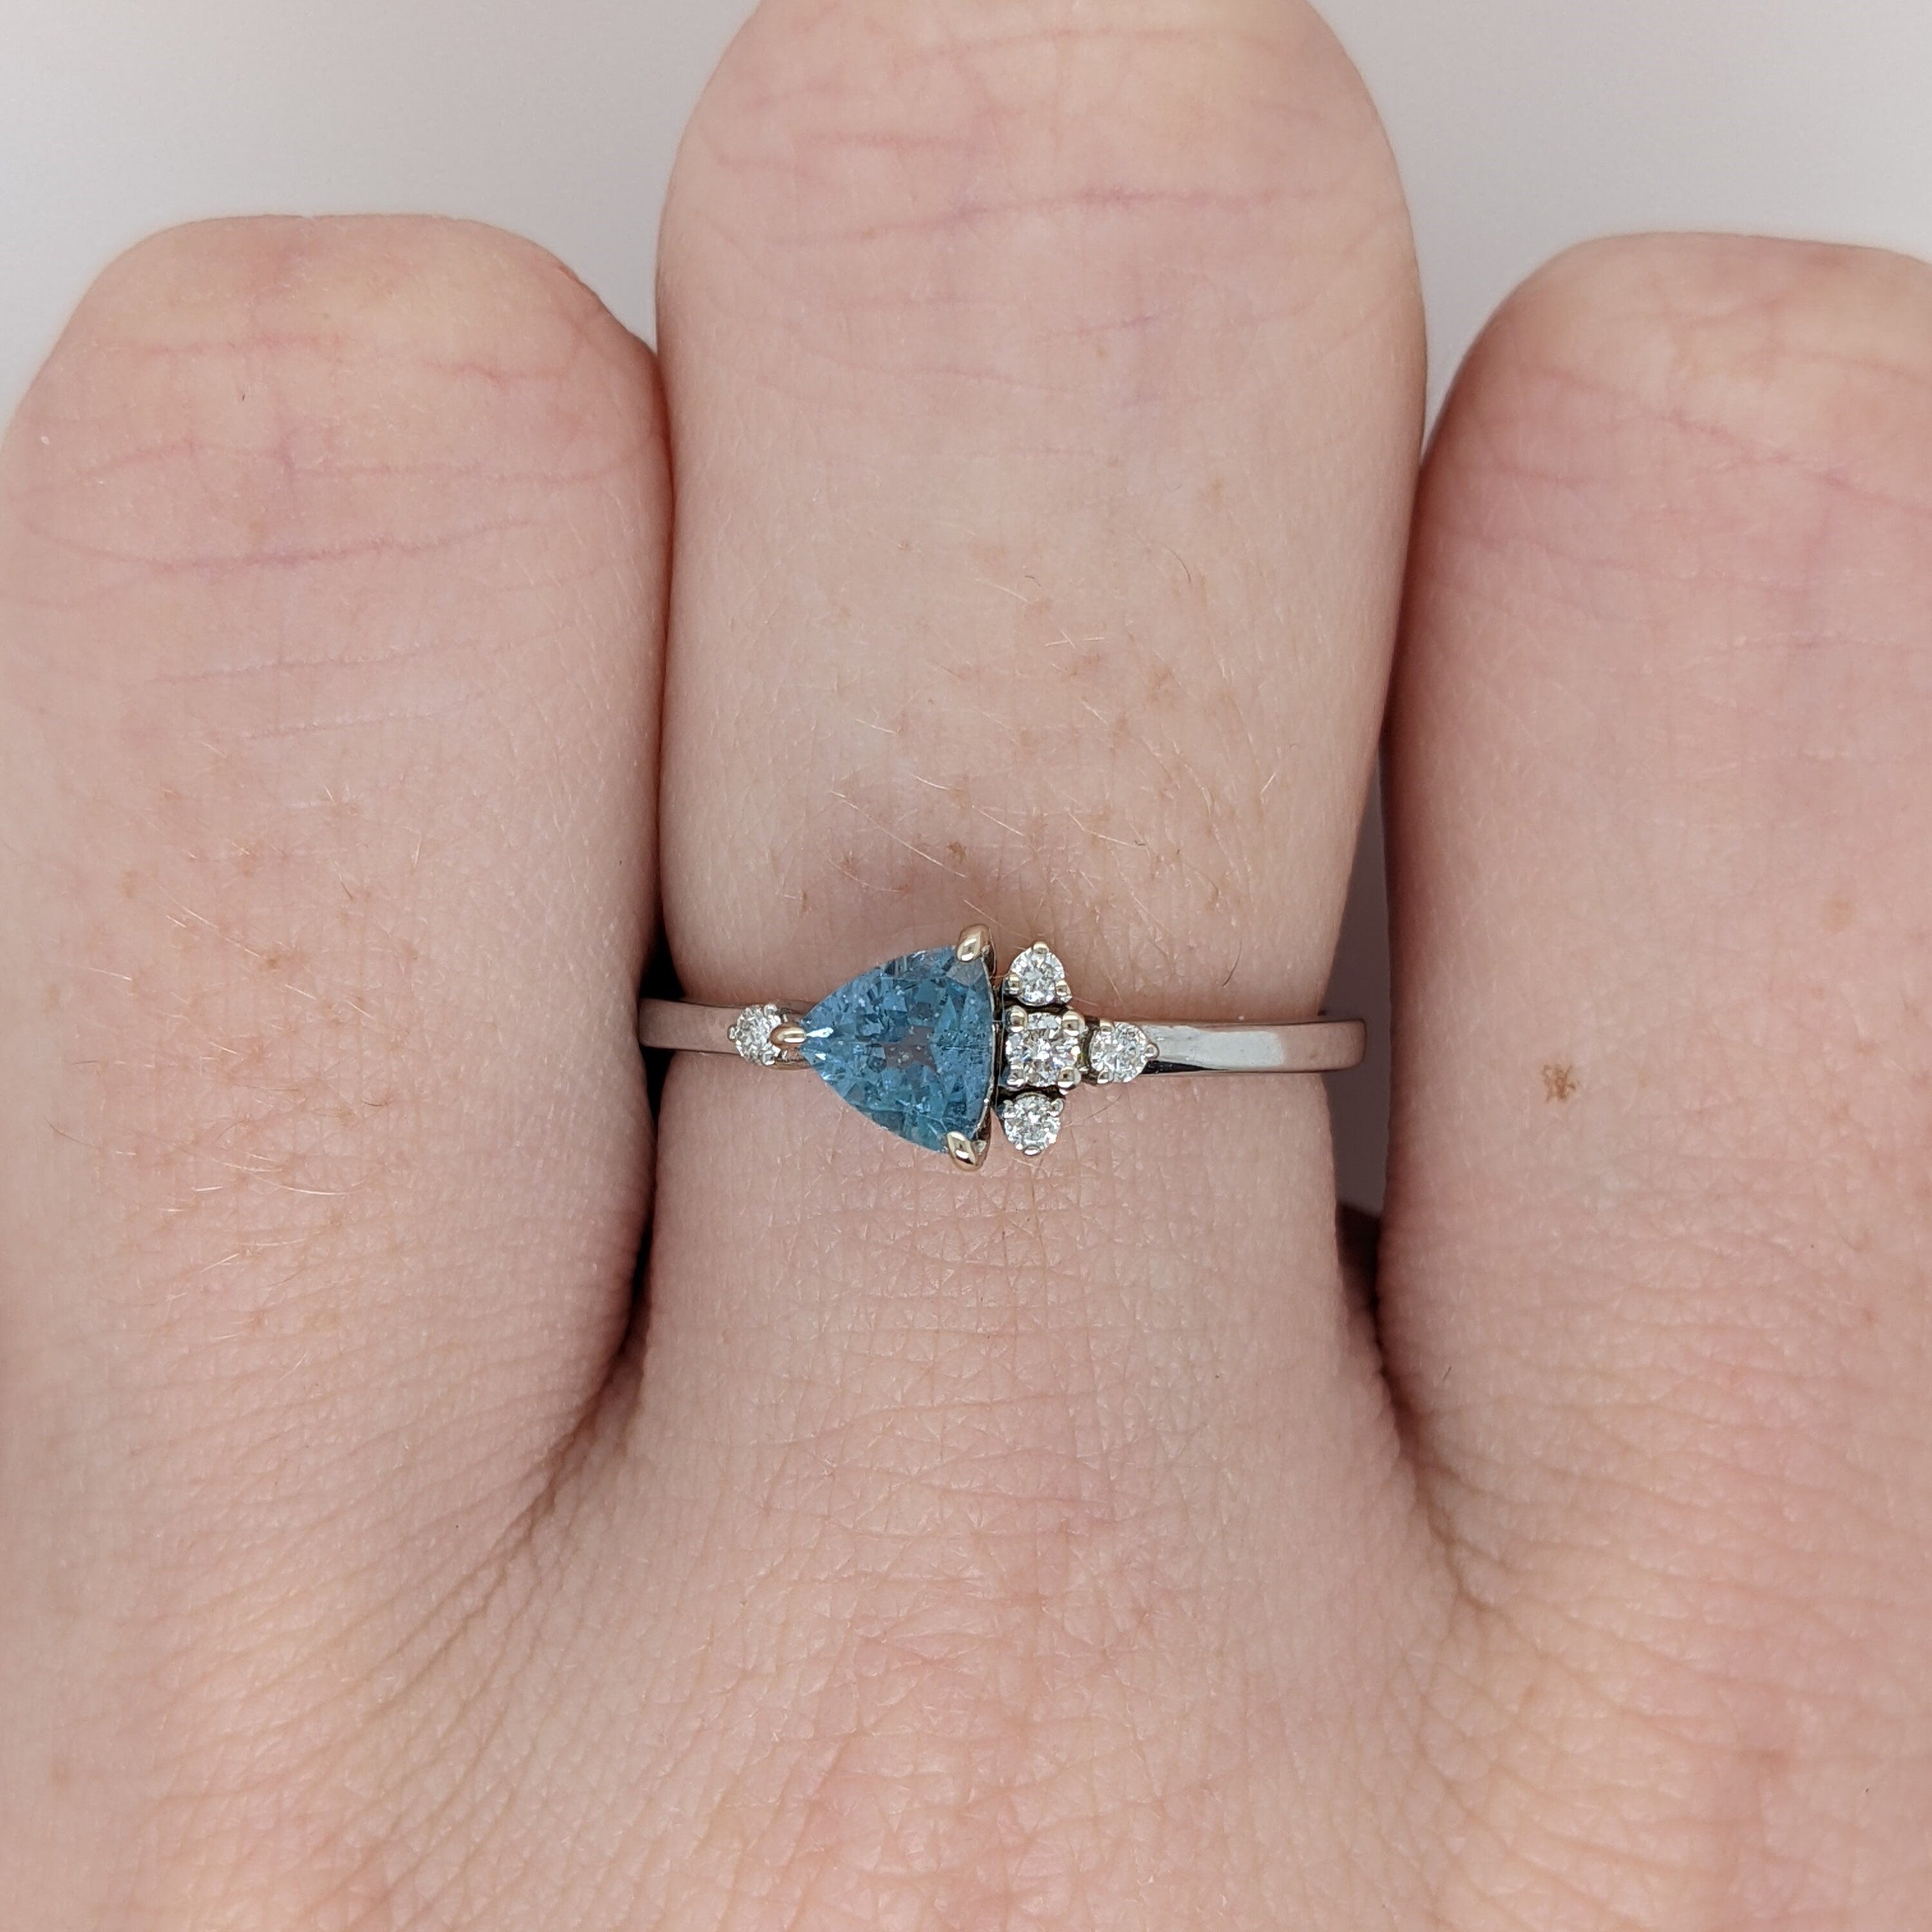 Gorgeous Trillion Aquamarine Ring in White Gold with Diamond Accents | Statement Ring | Natural and Sustainable | March Birthstone